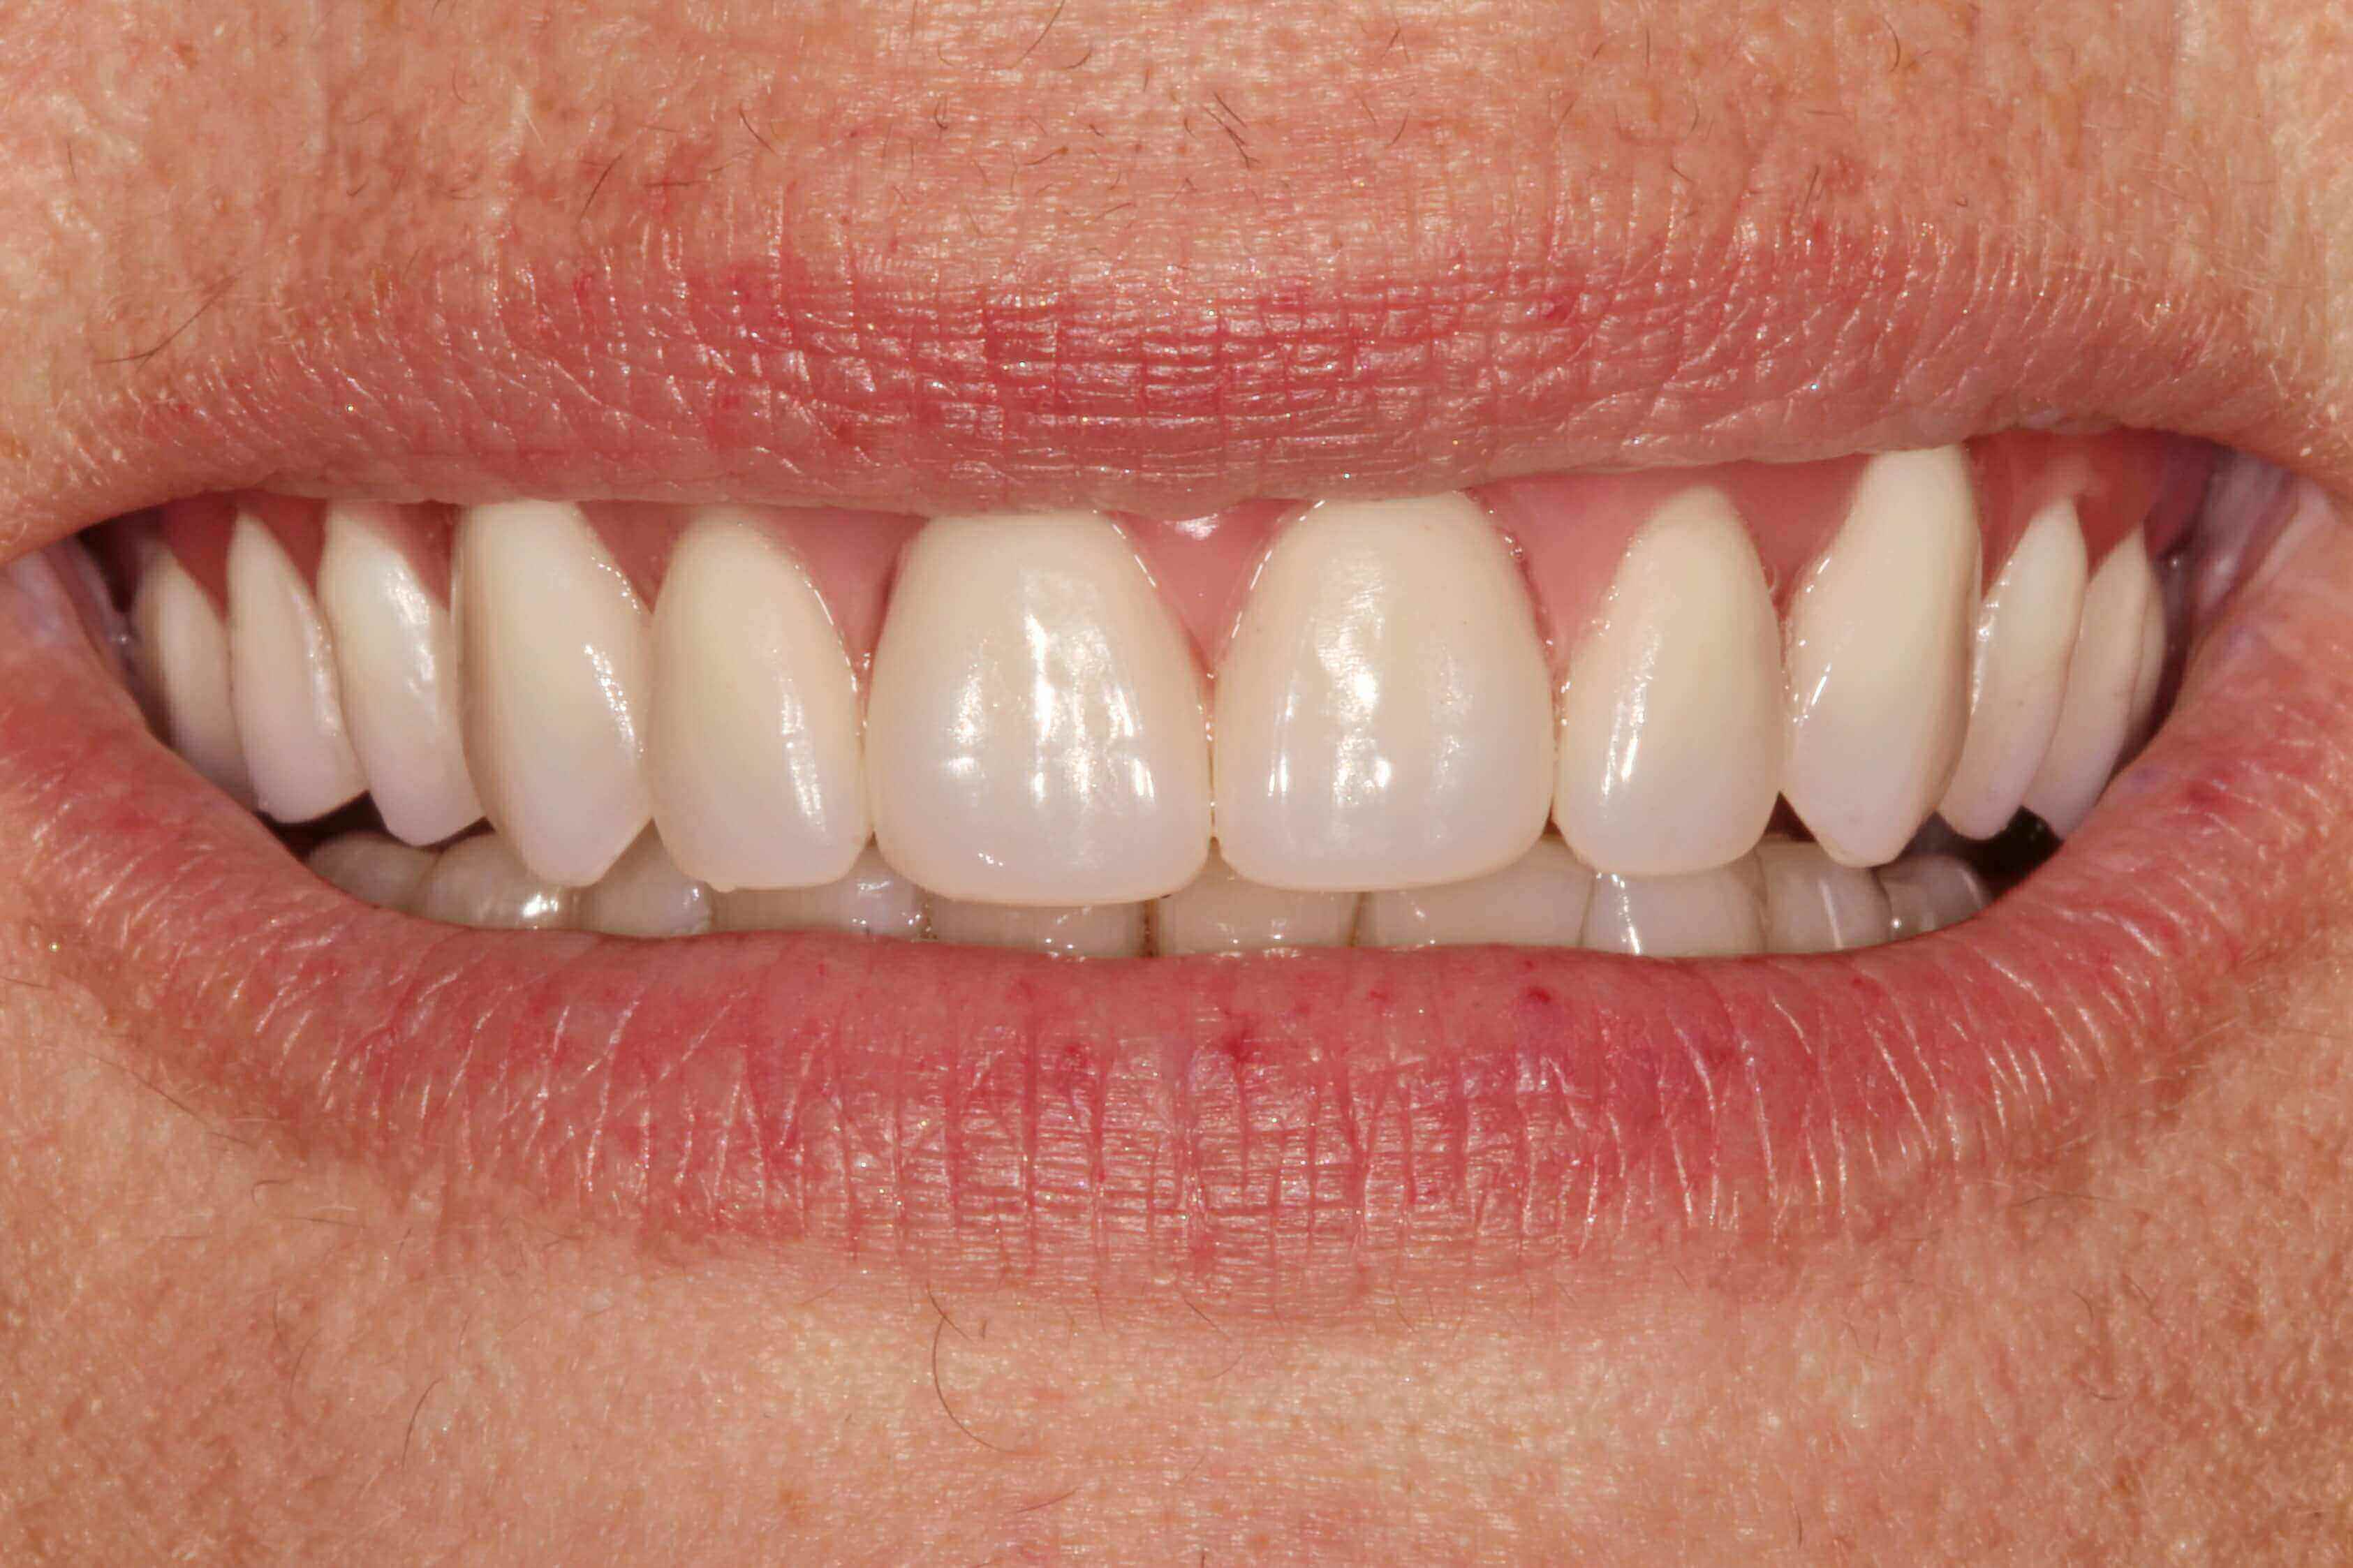 Image of teeth after treatment